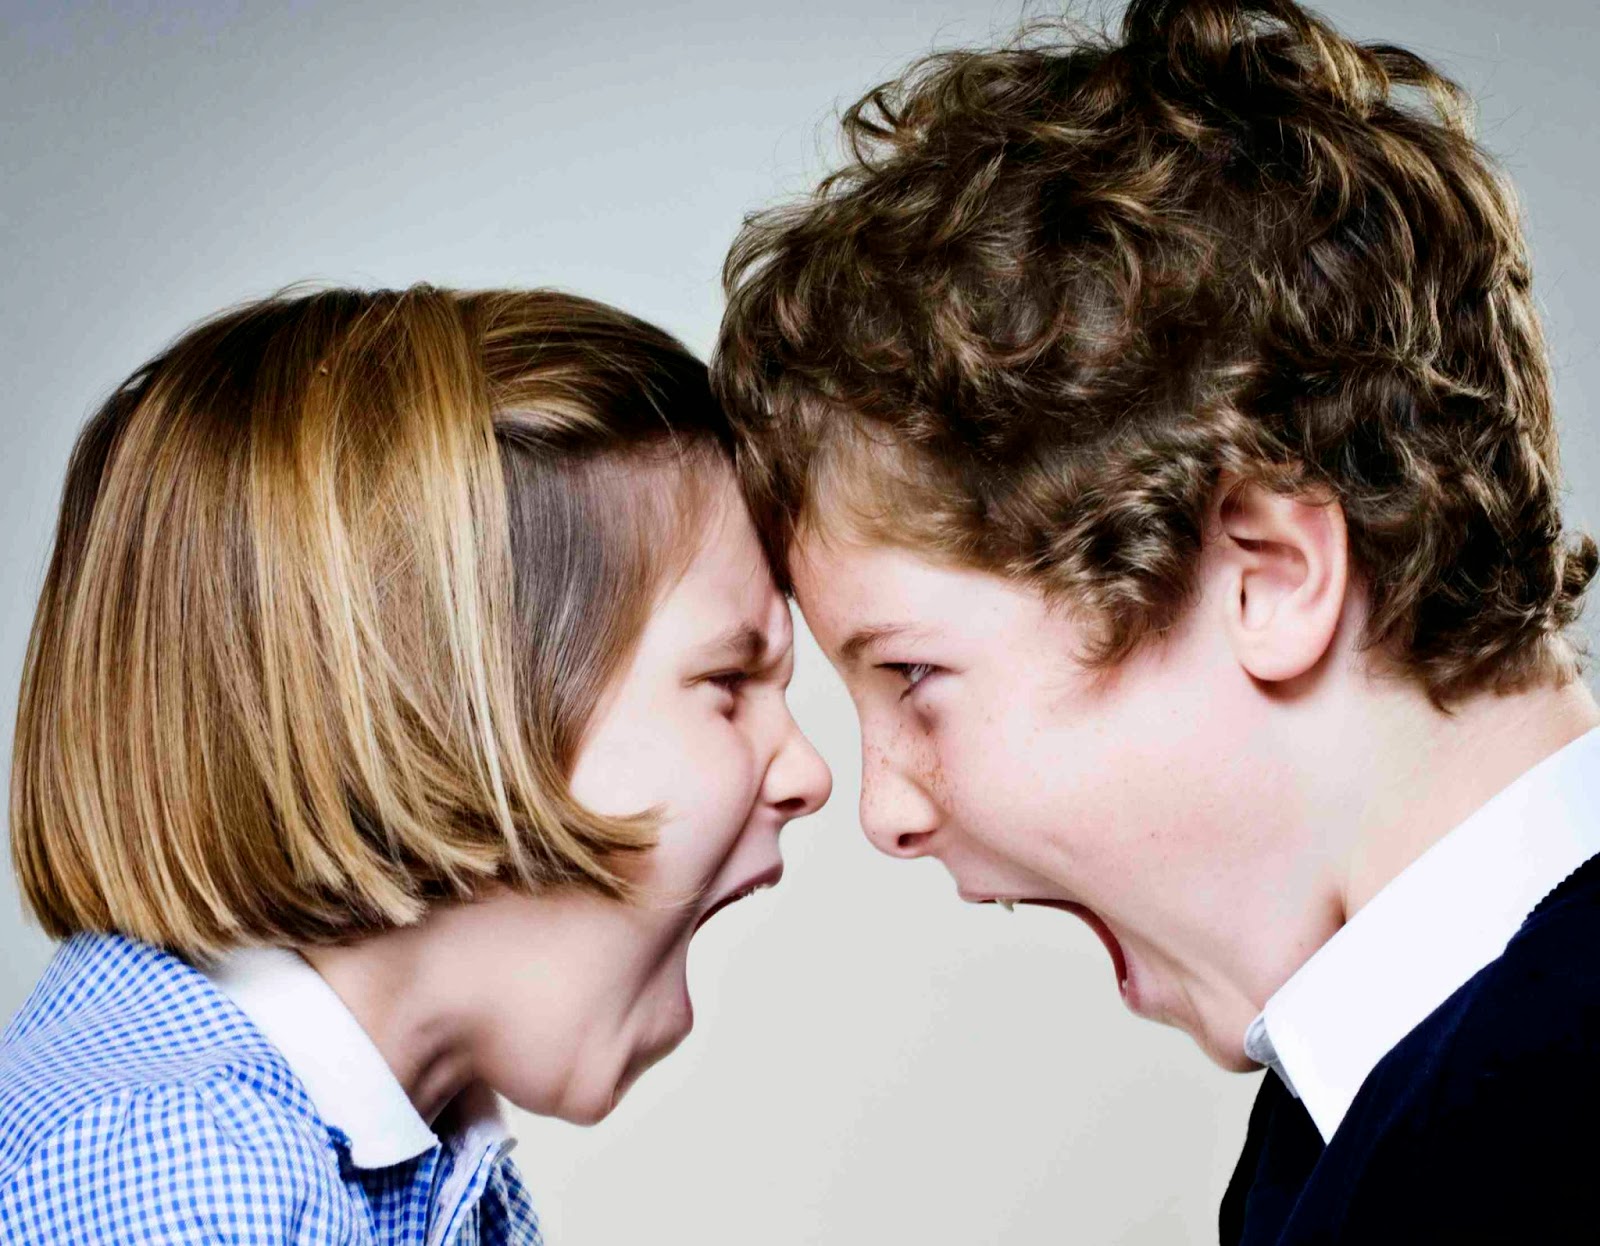 Fairmont Blog HOW TO manage sibling rivalry